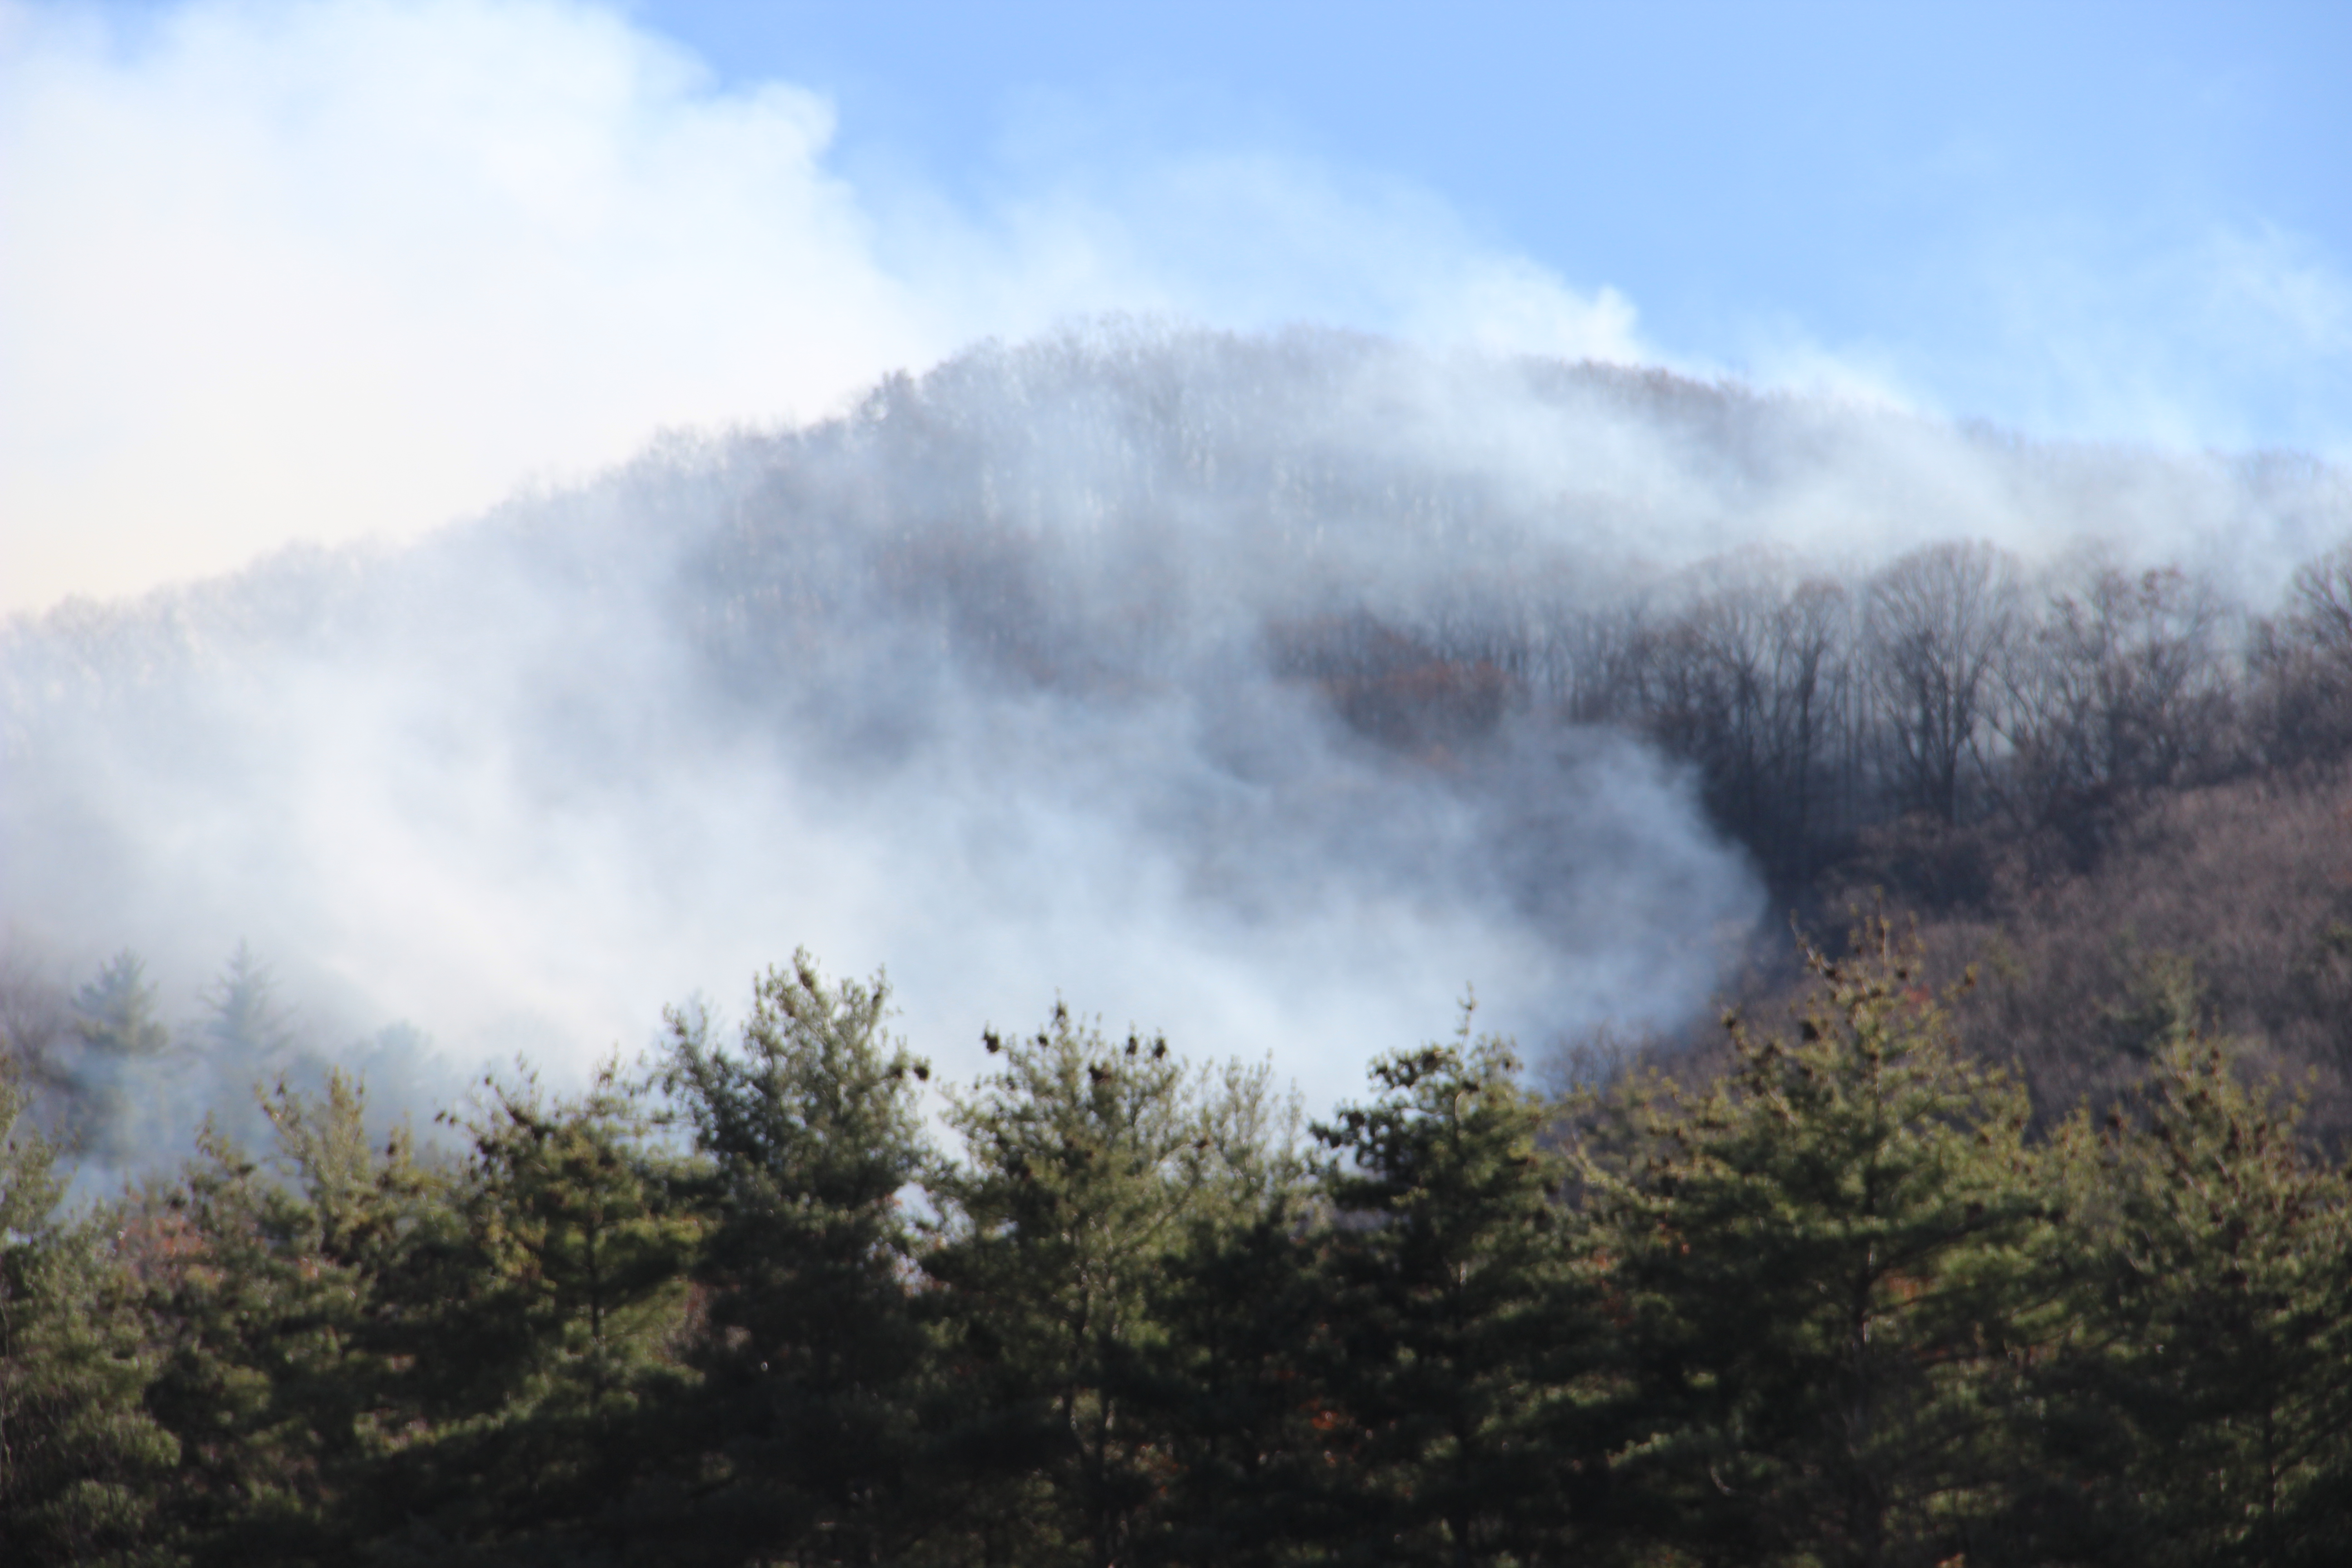 UPDATE: WYTHE COUNTY FOREST FIRE